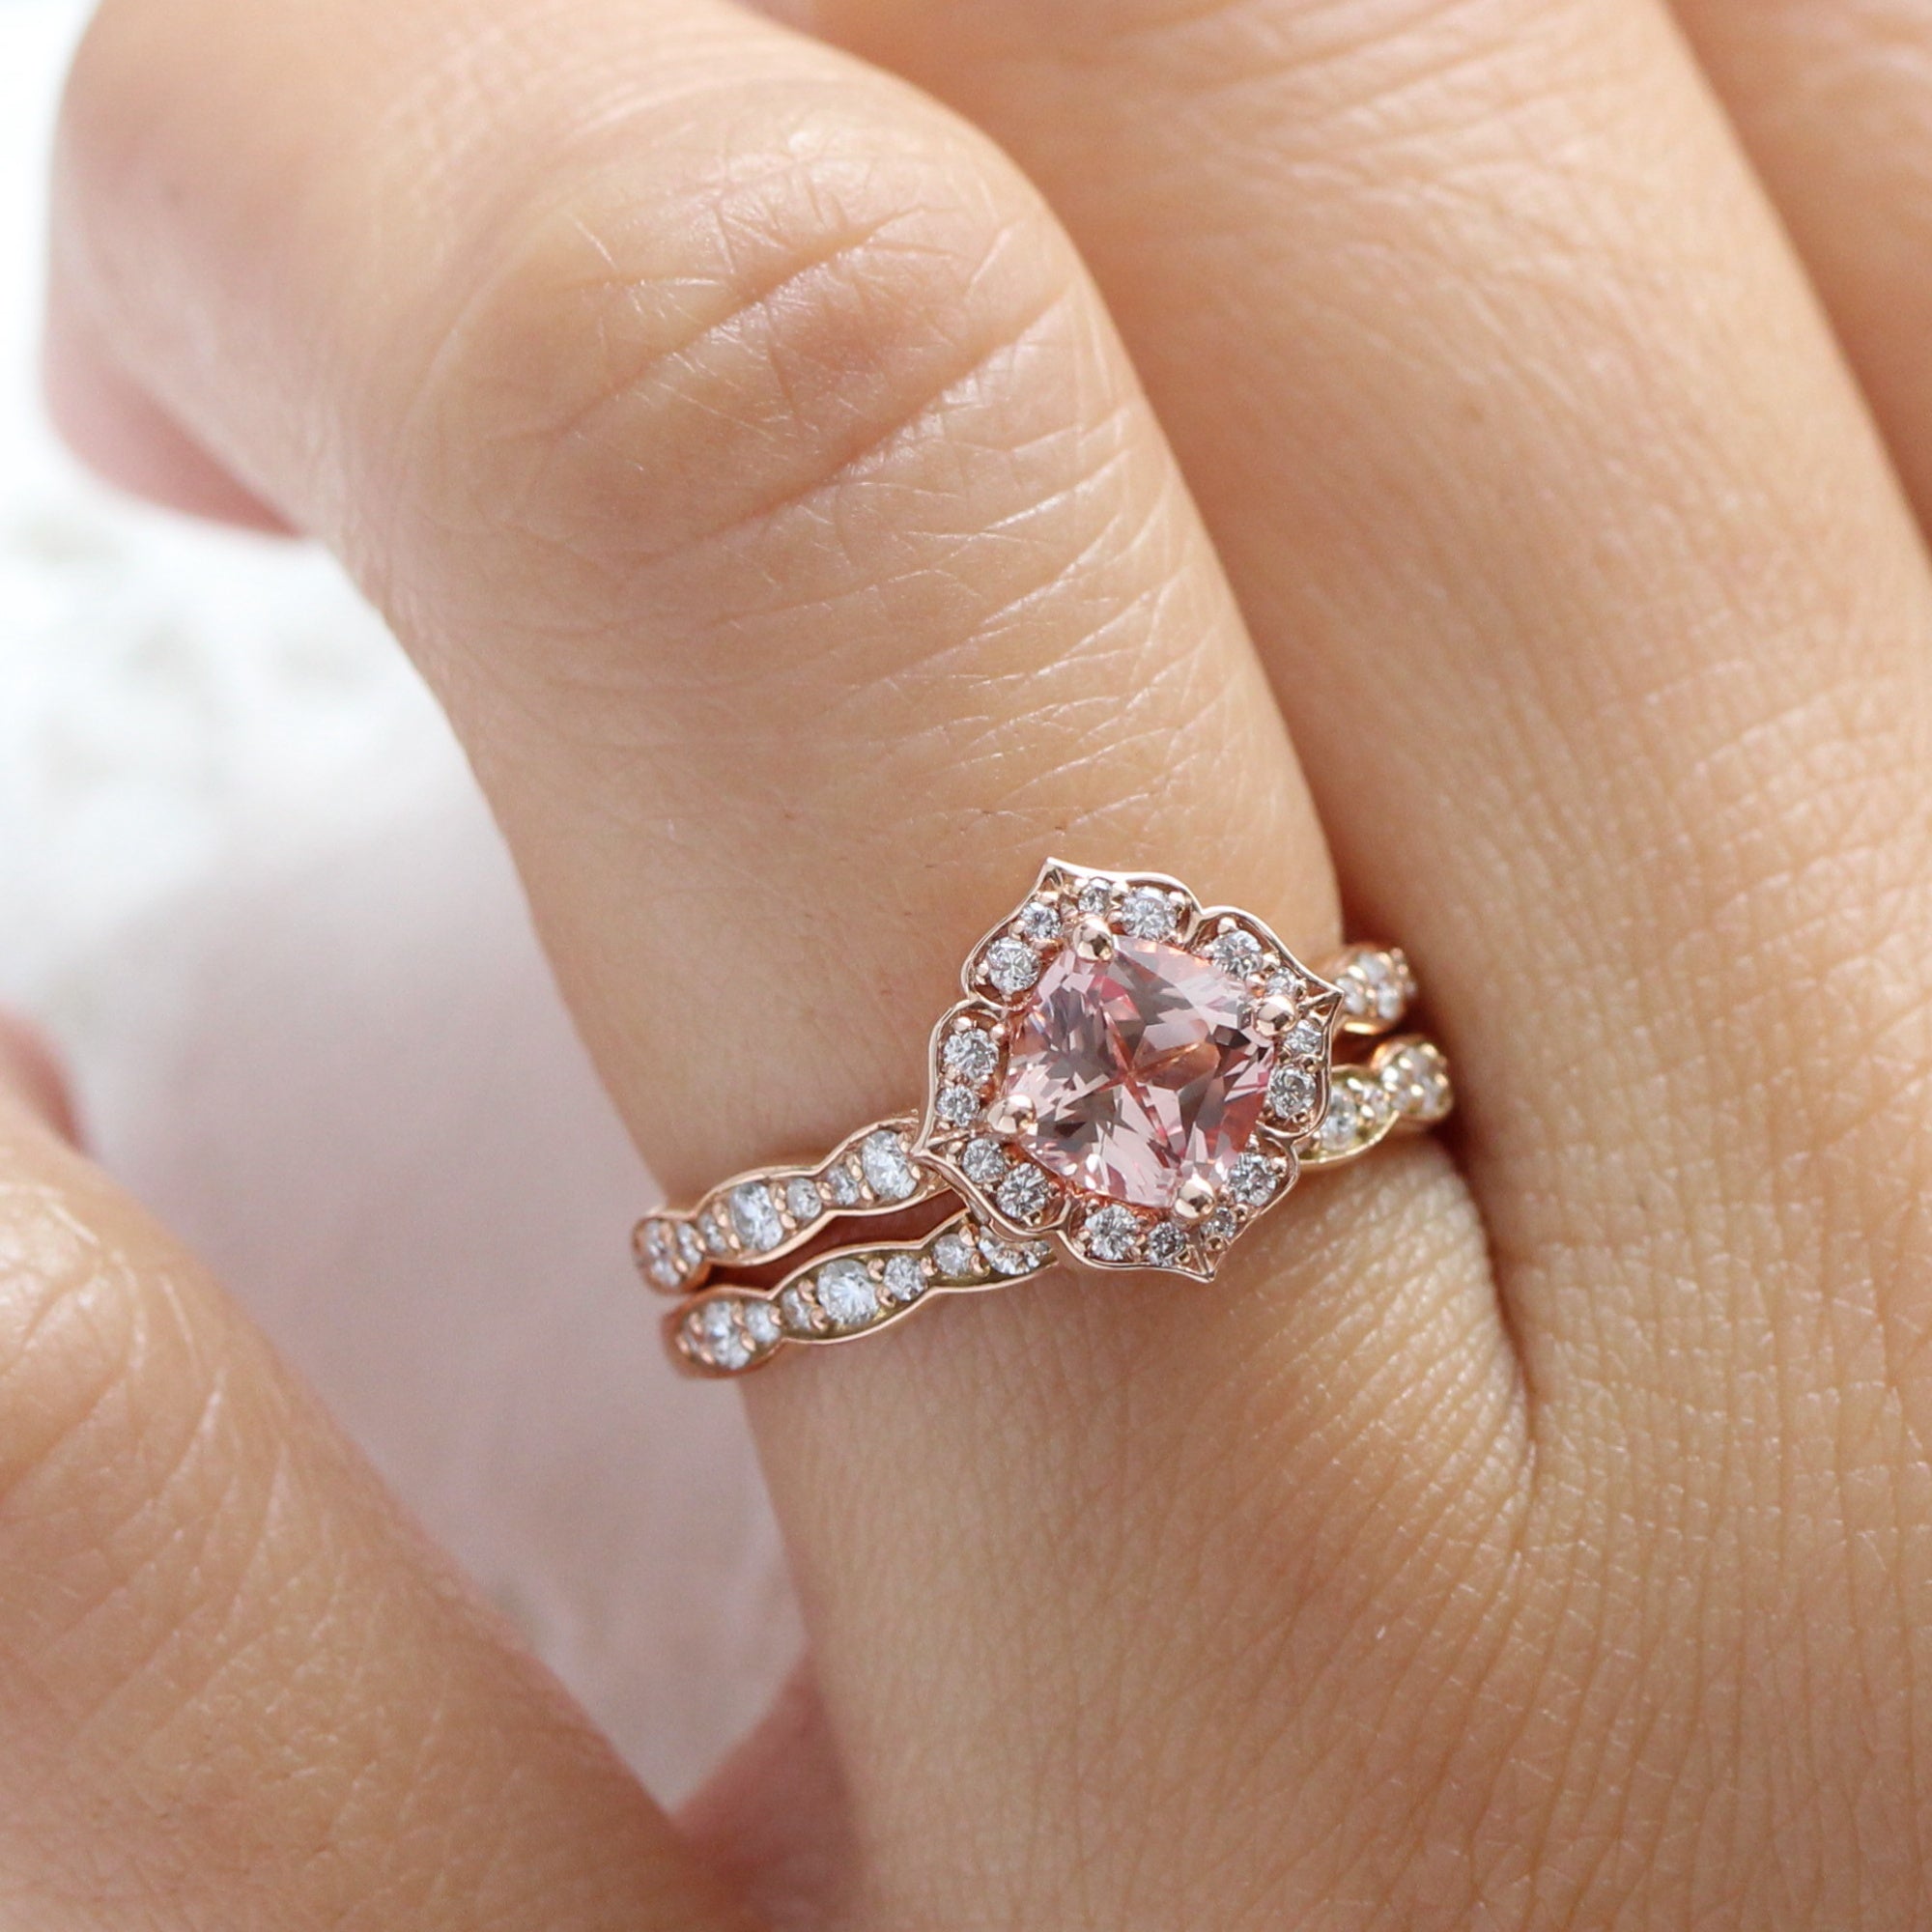 Cushion peach sapphire engagement ring stack rose gold vintage halo diamond sapphire ring la more design jewelry